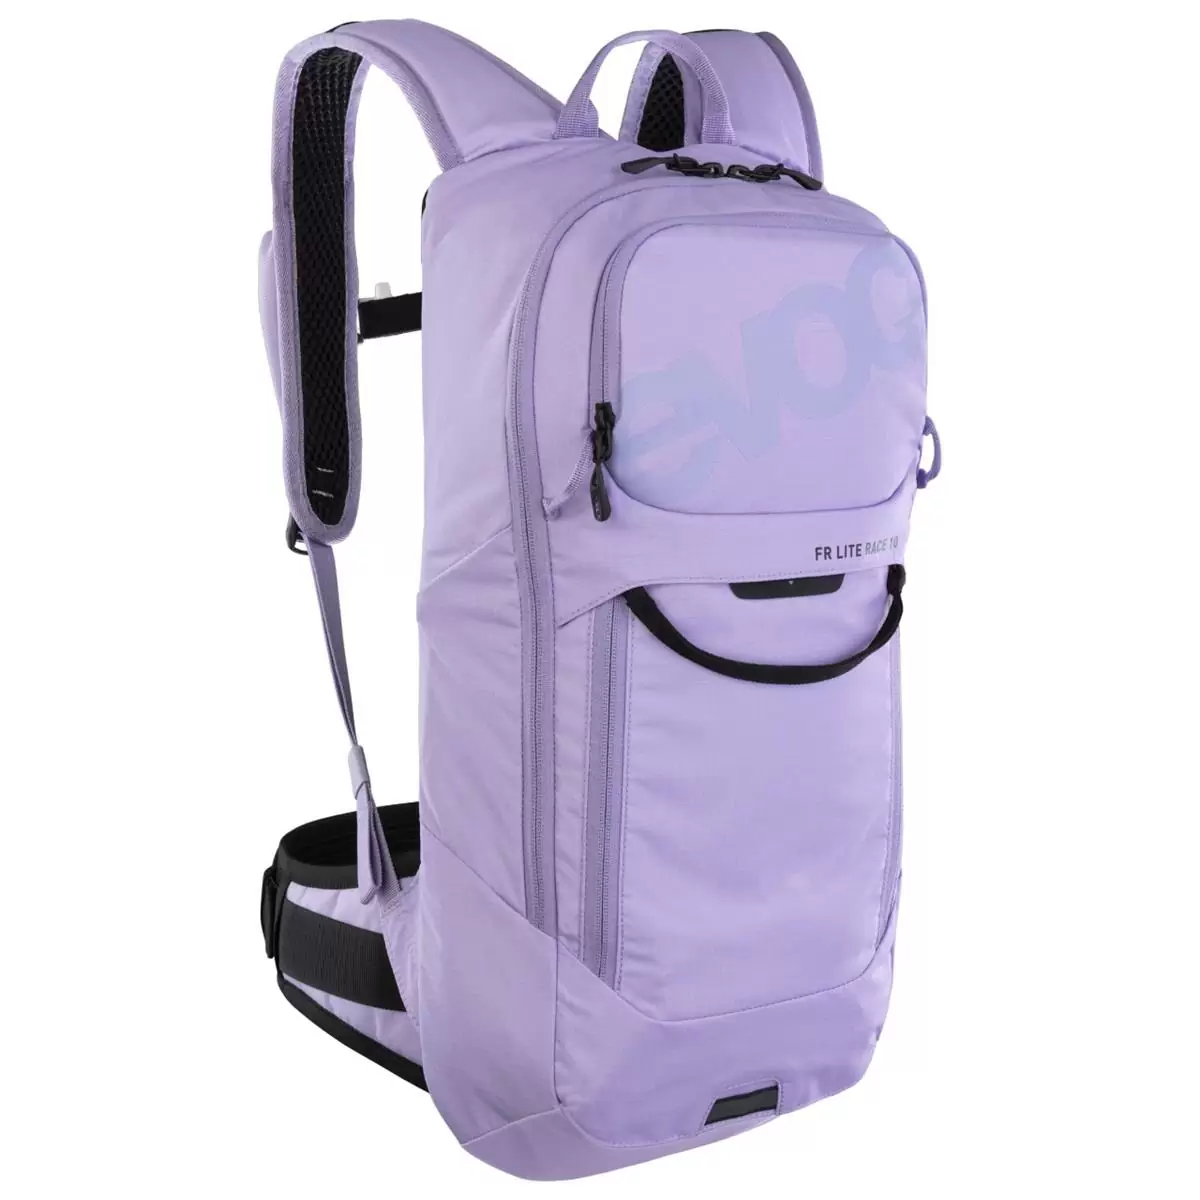 FR LITE RACE 10 Backpack With Back Protector 10L Purple Size S - image